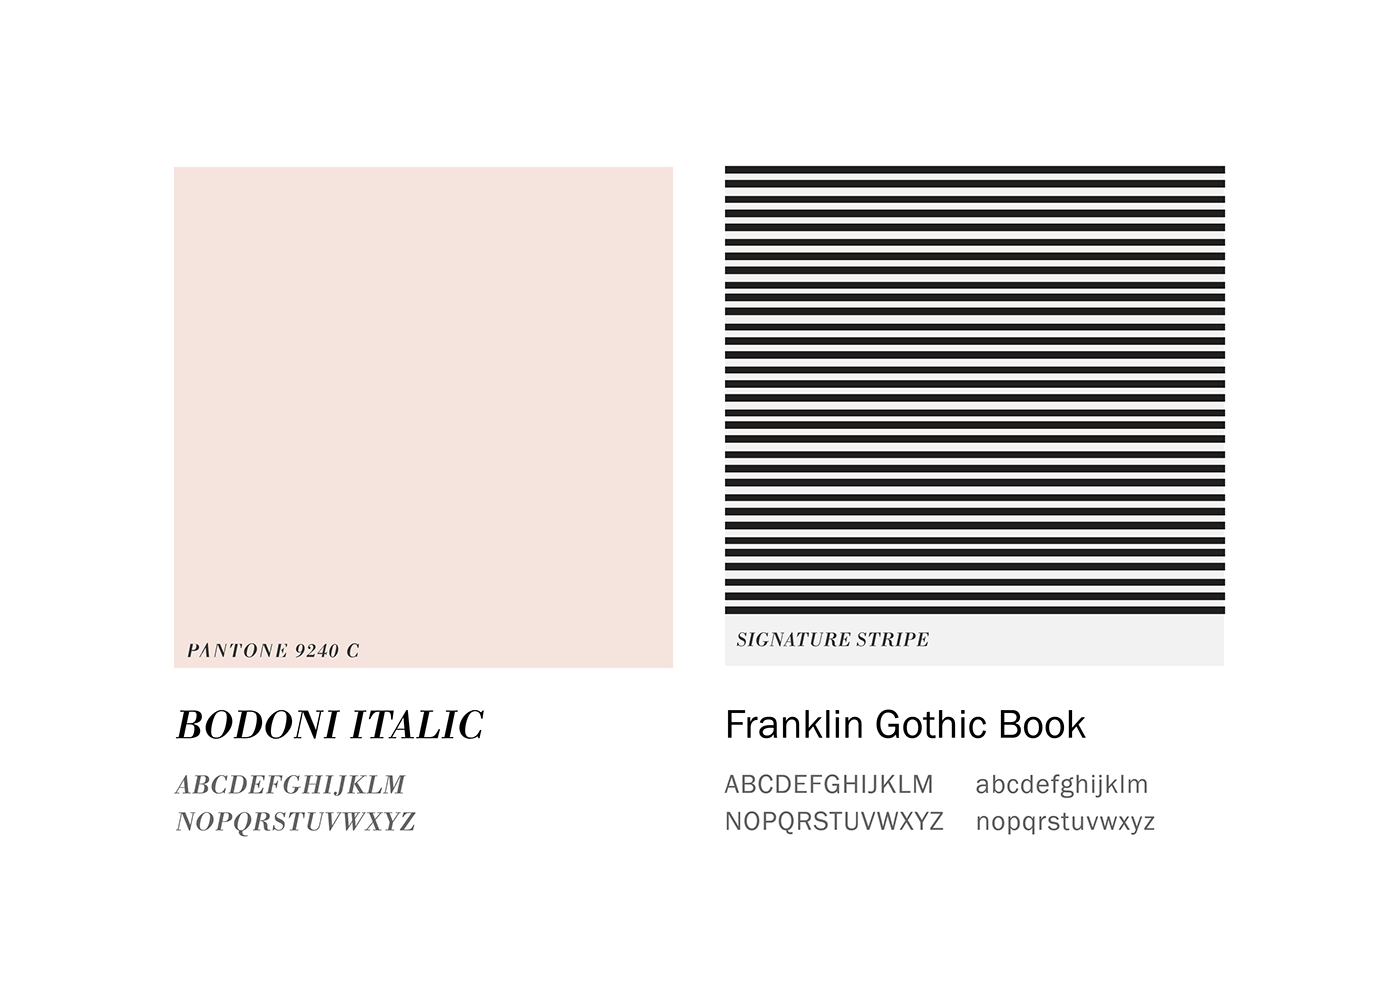 Fashion  brand experience accessories visual identity New York bodoni gifs motion styling  Collateral